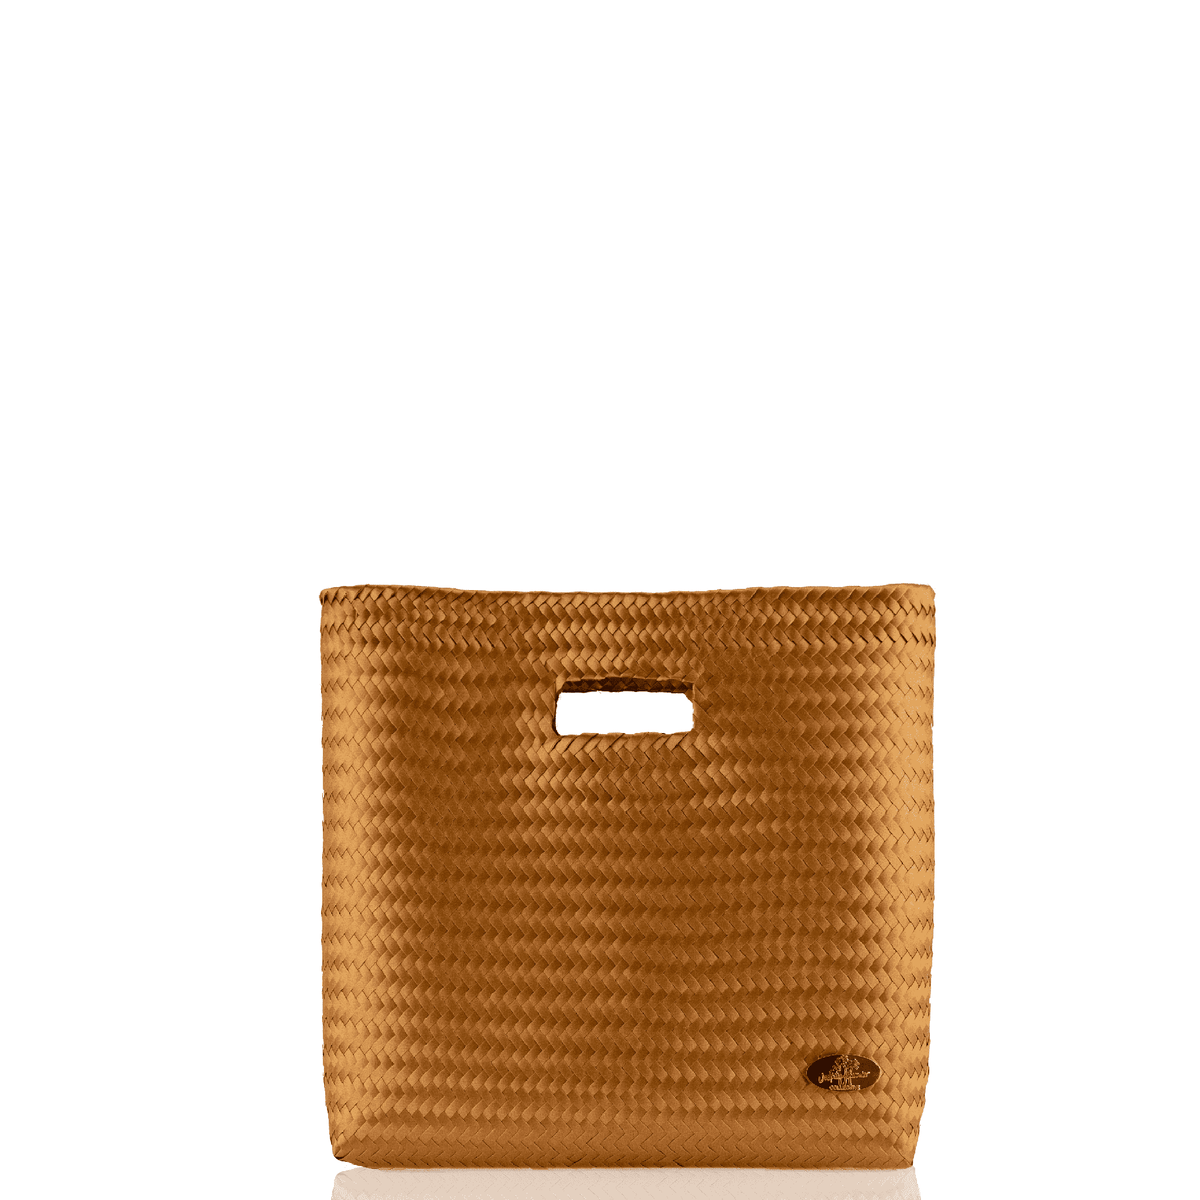 Palma Woven Hand Bag in Solid (More Colors Available) - Josephine Alexander Collective